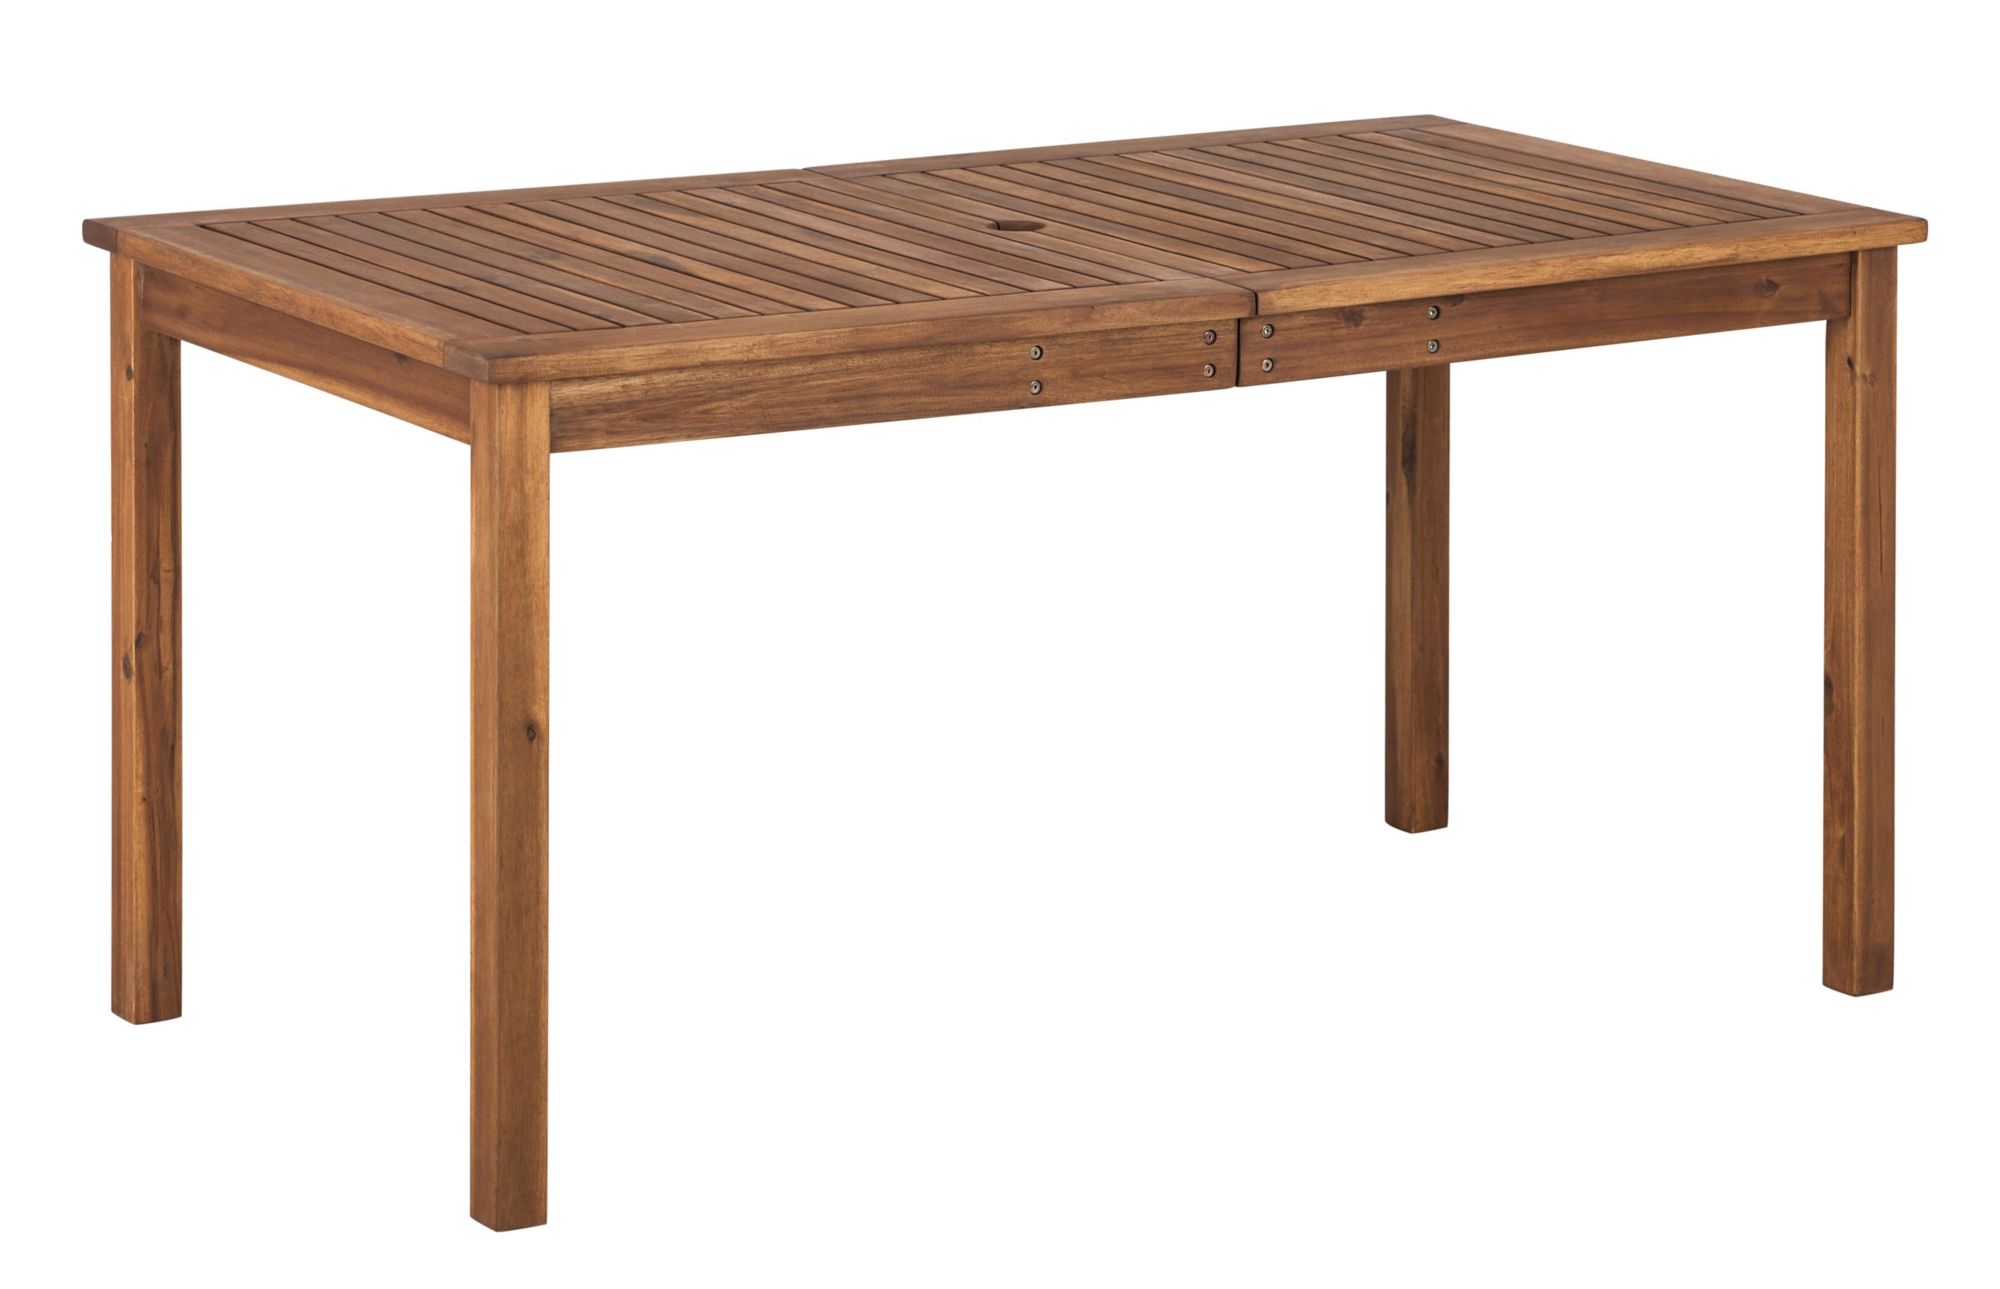 W. Trends Outdoor Cliff Acacia Wood Dining Table - Brown